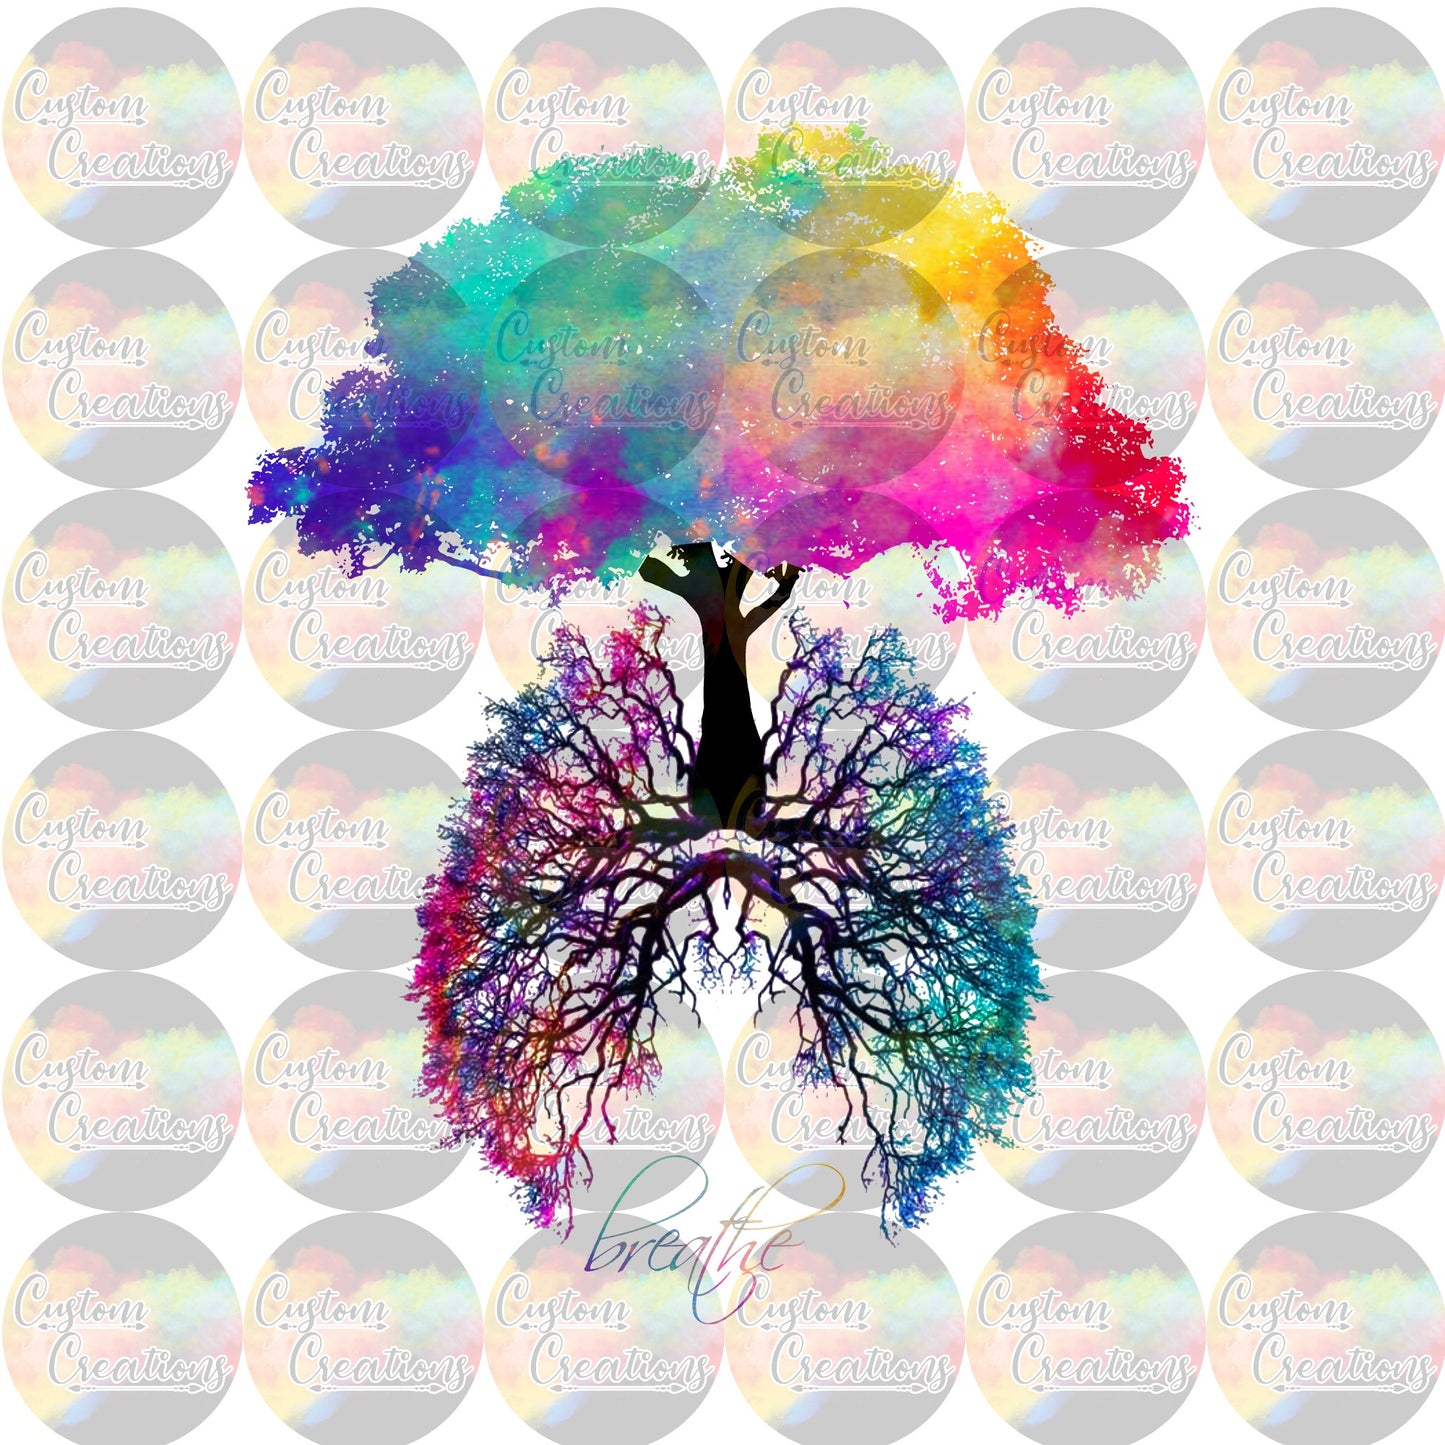 Watercolor Breathe File with Tree and Lungs